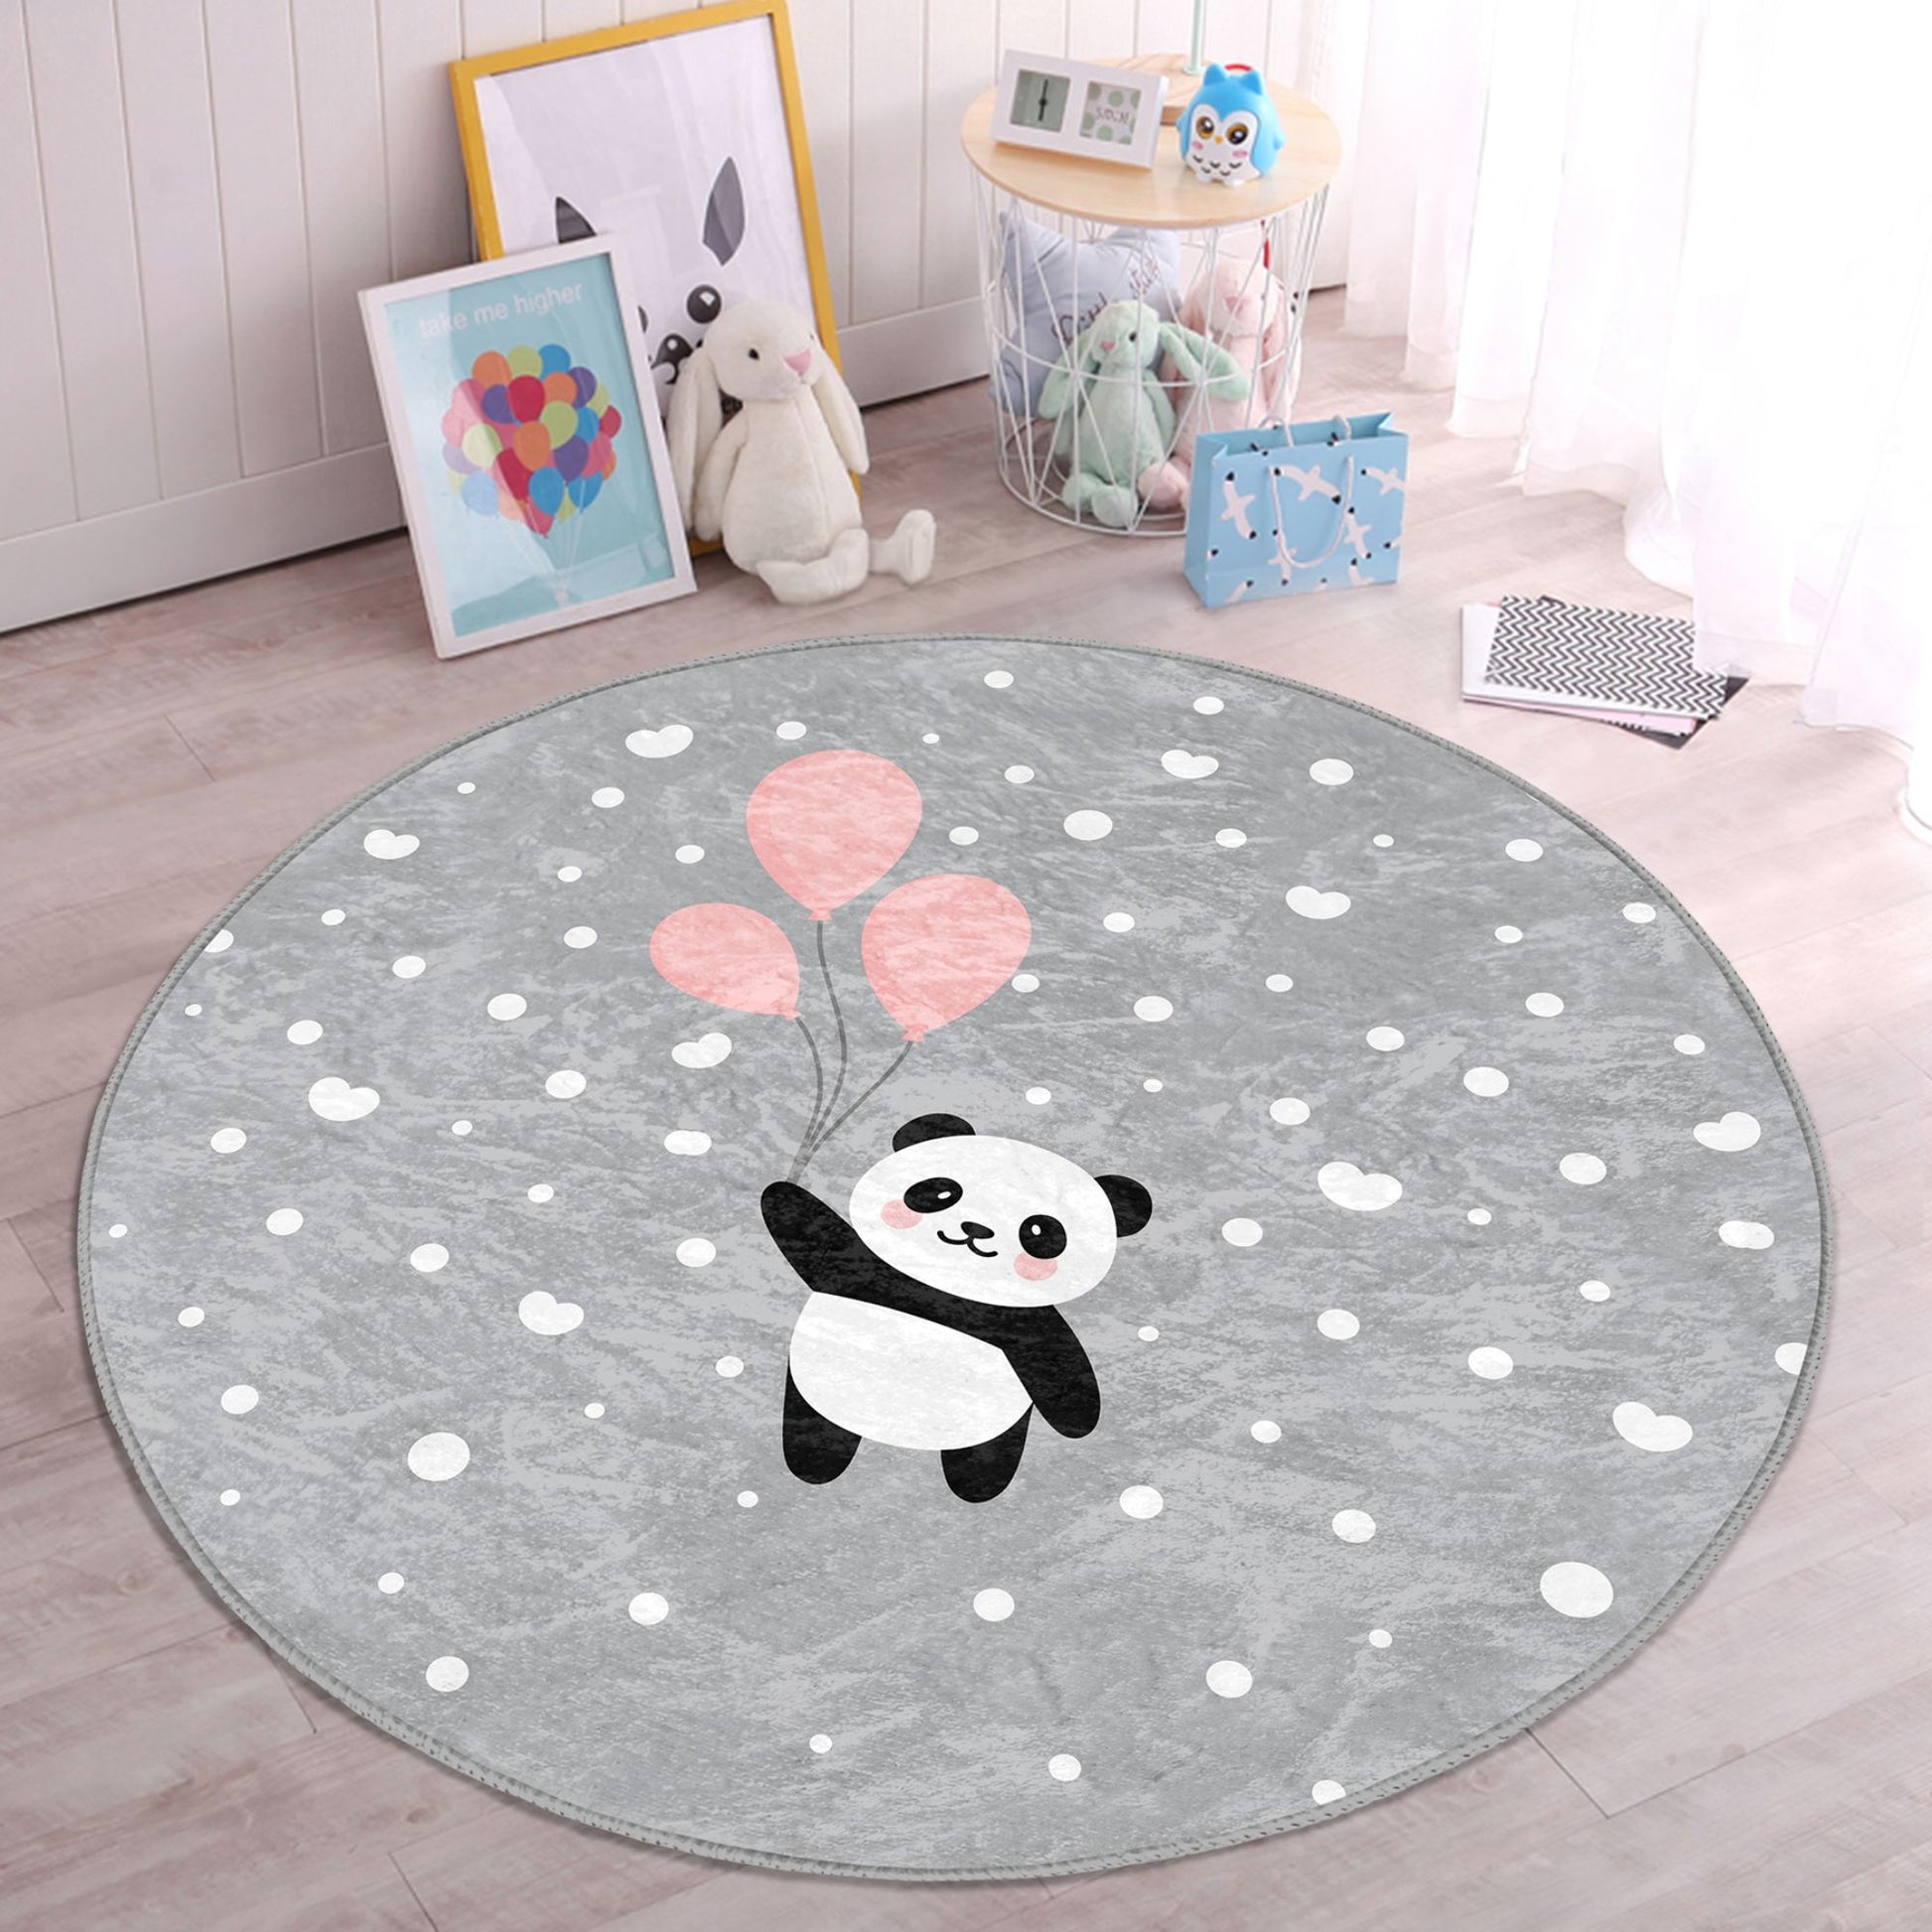 Colorful Kids Rug featuring Panda and Balloon